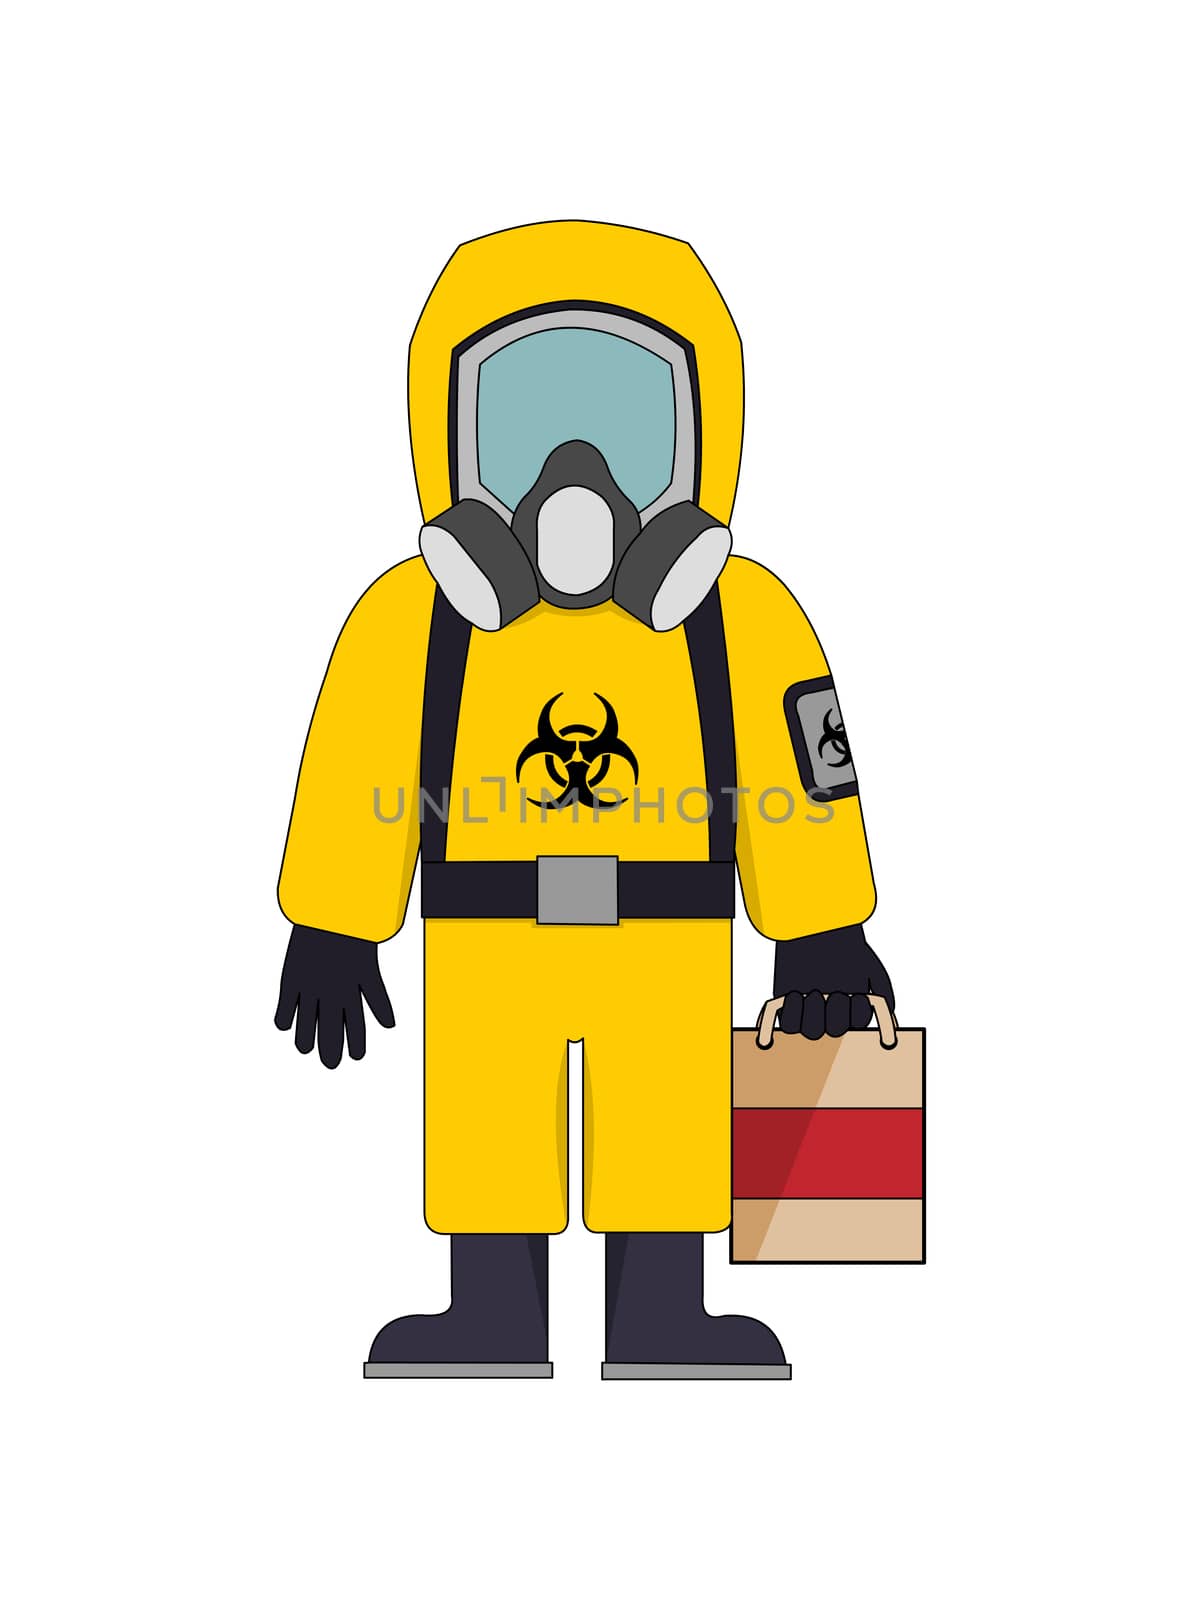 A yellow hazard suit holding a carrier bag.